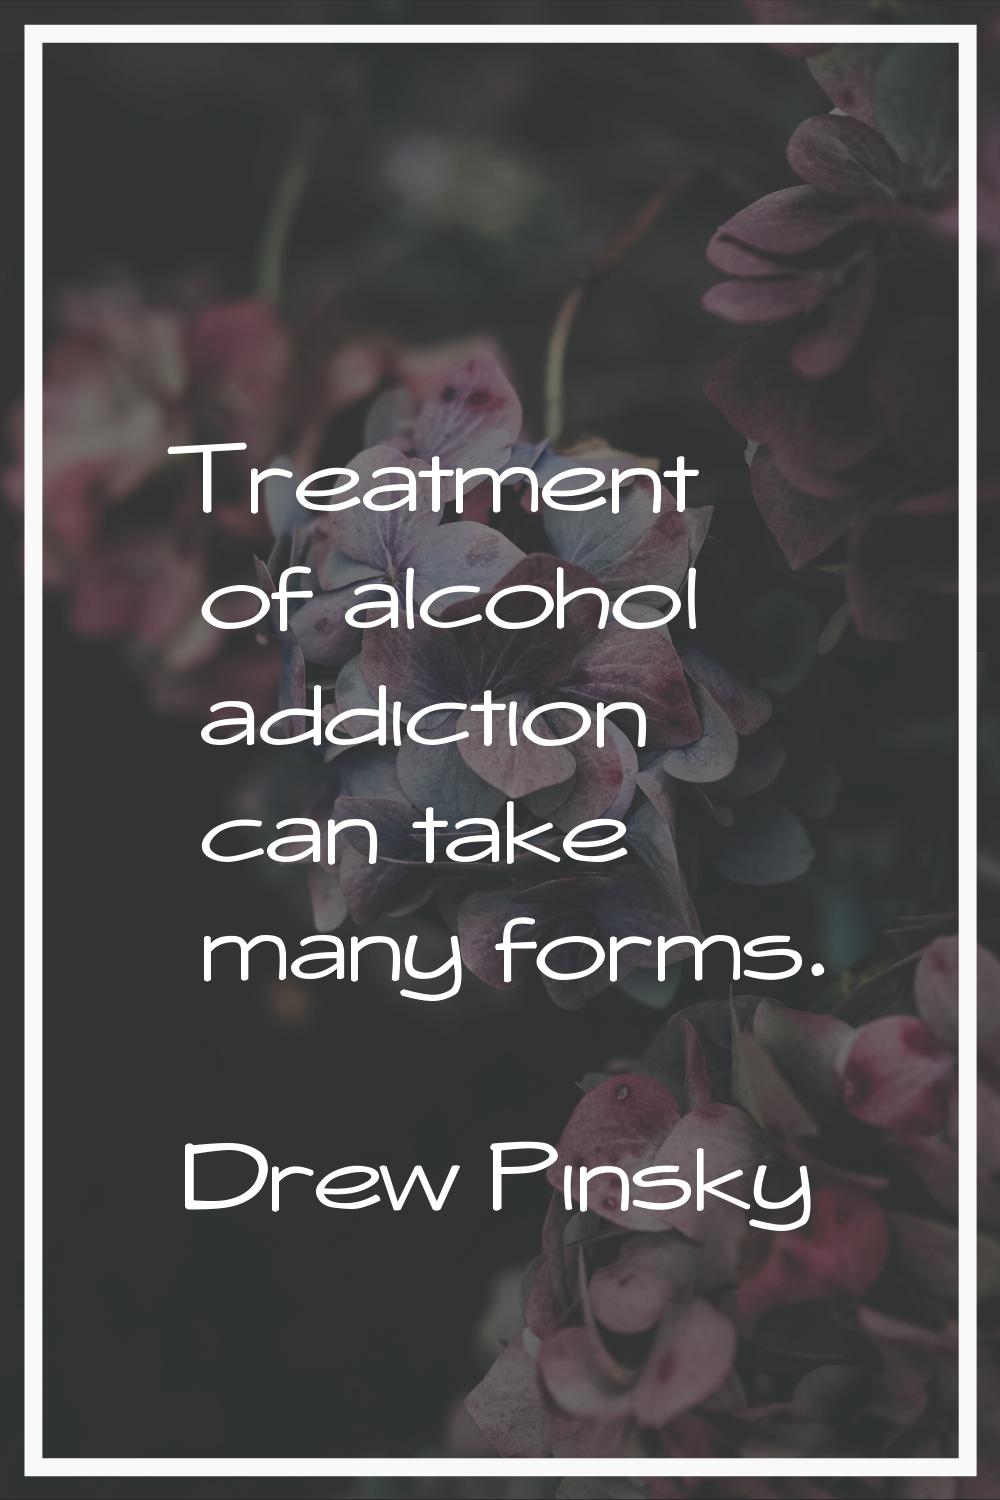 Treatment of alcohol addiction can take many forms.